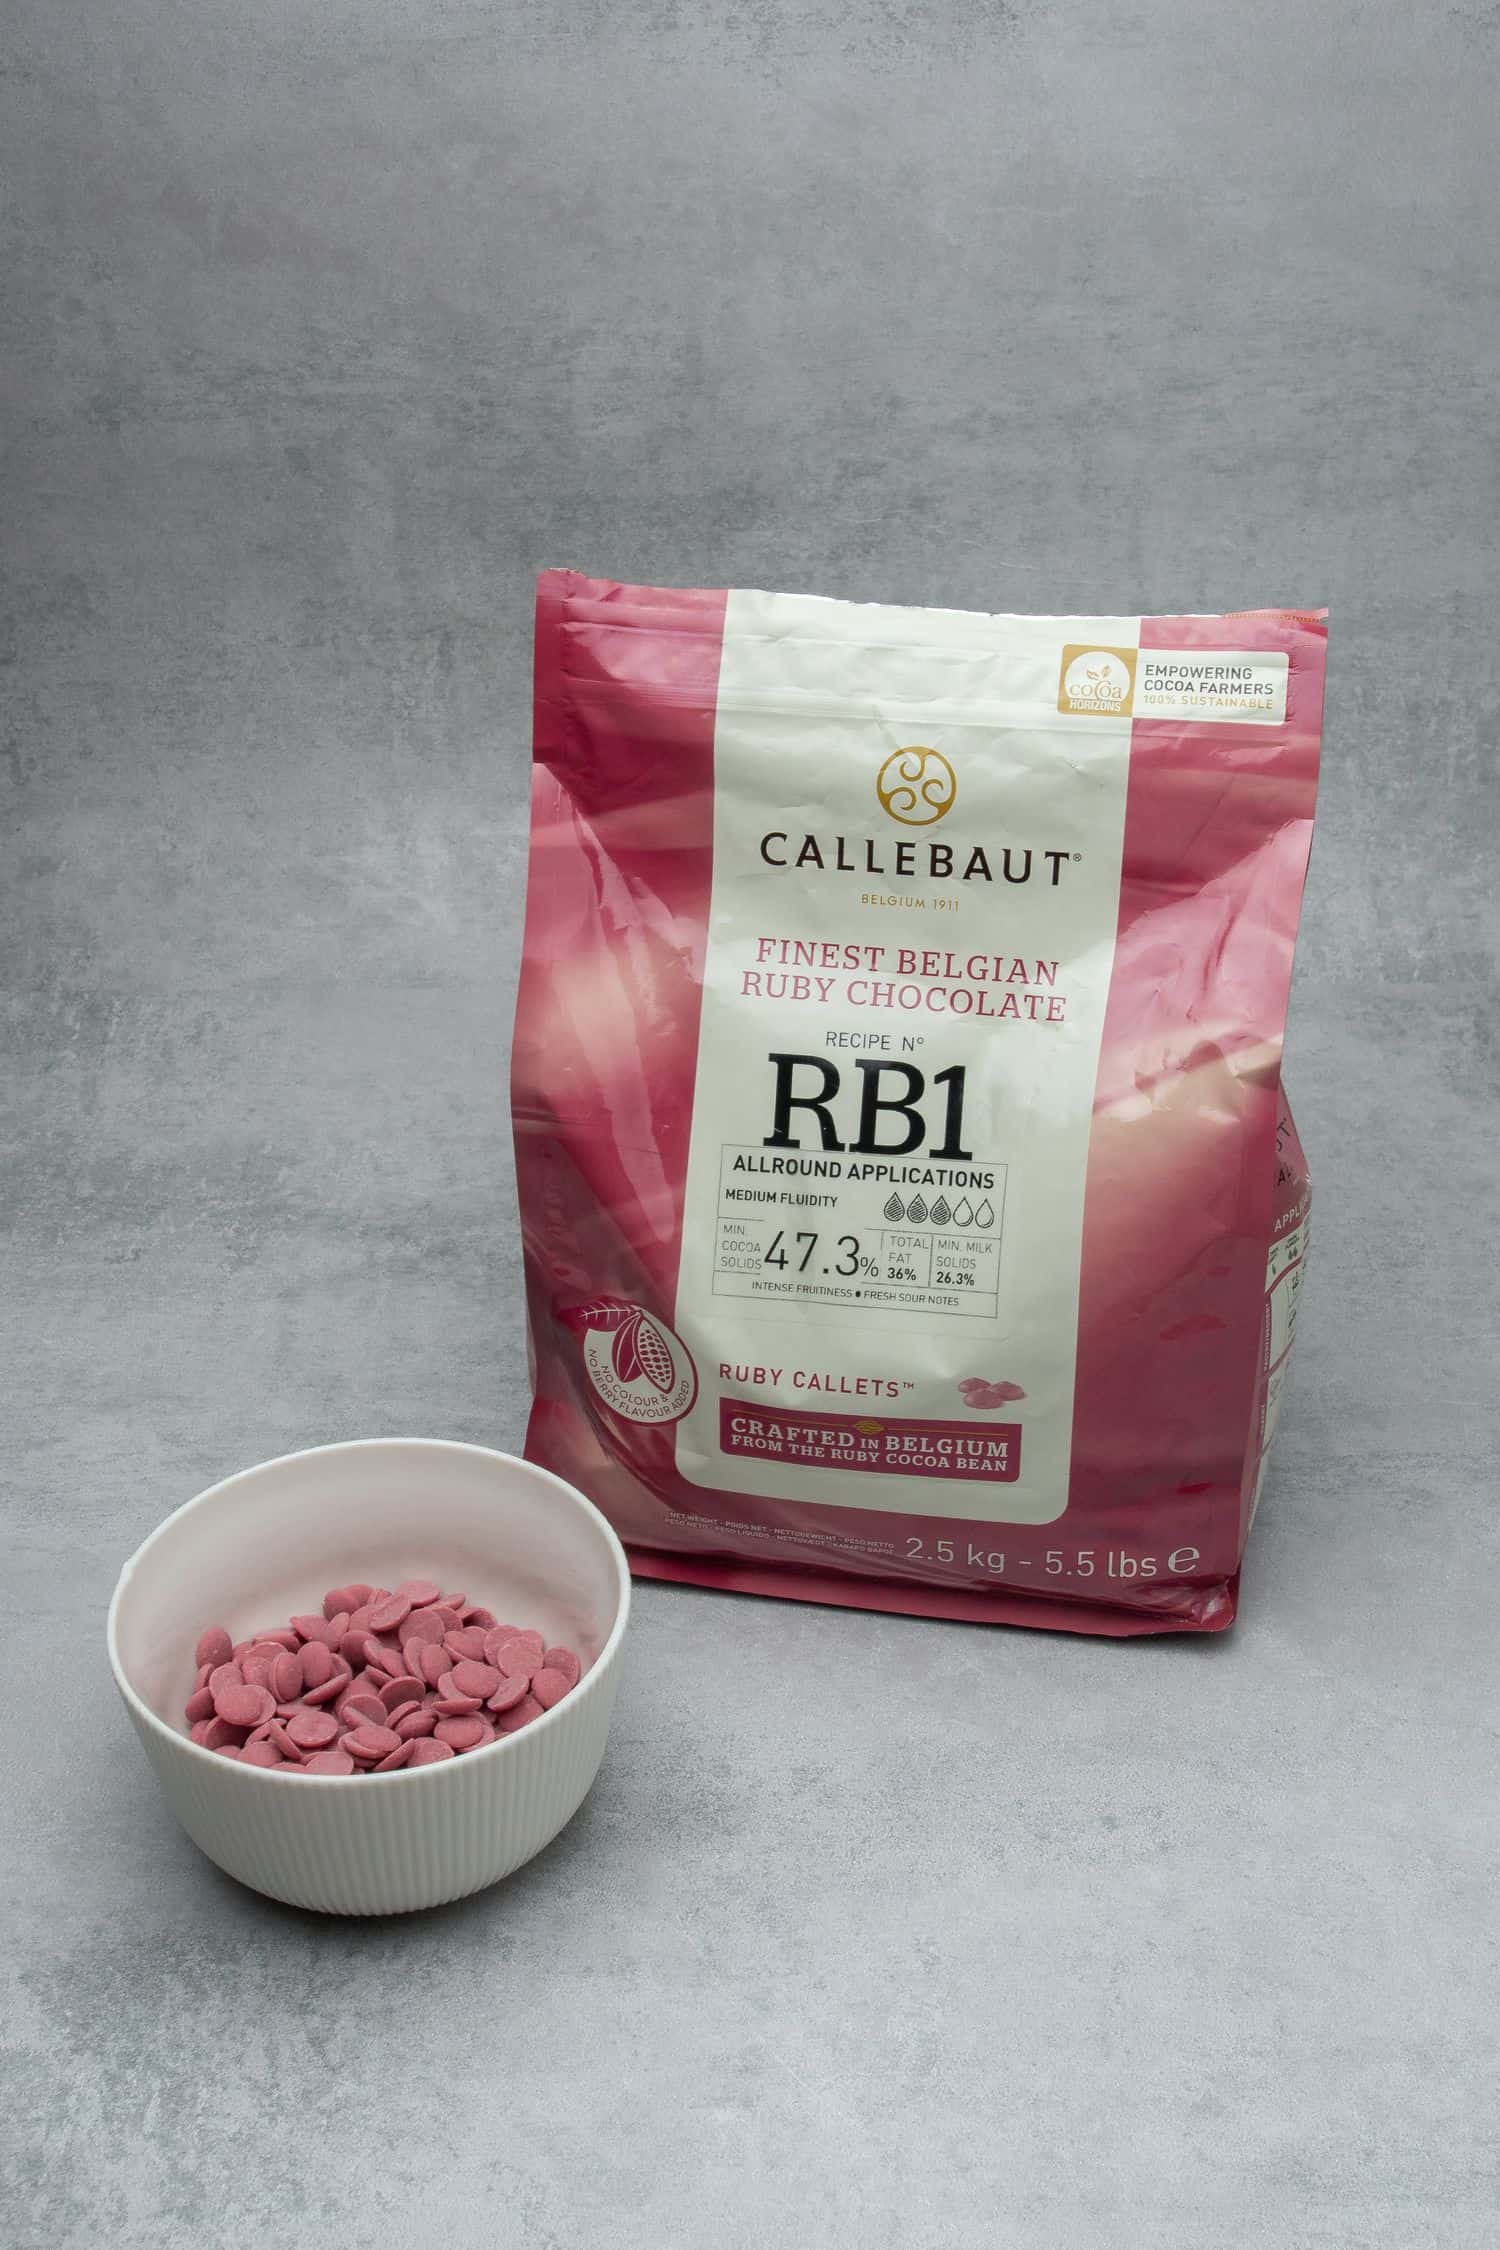 A bag of Callebaut ruby chocolate on a grey table top.